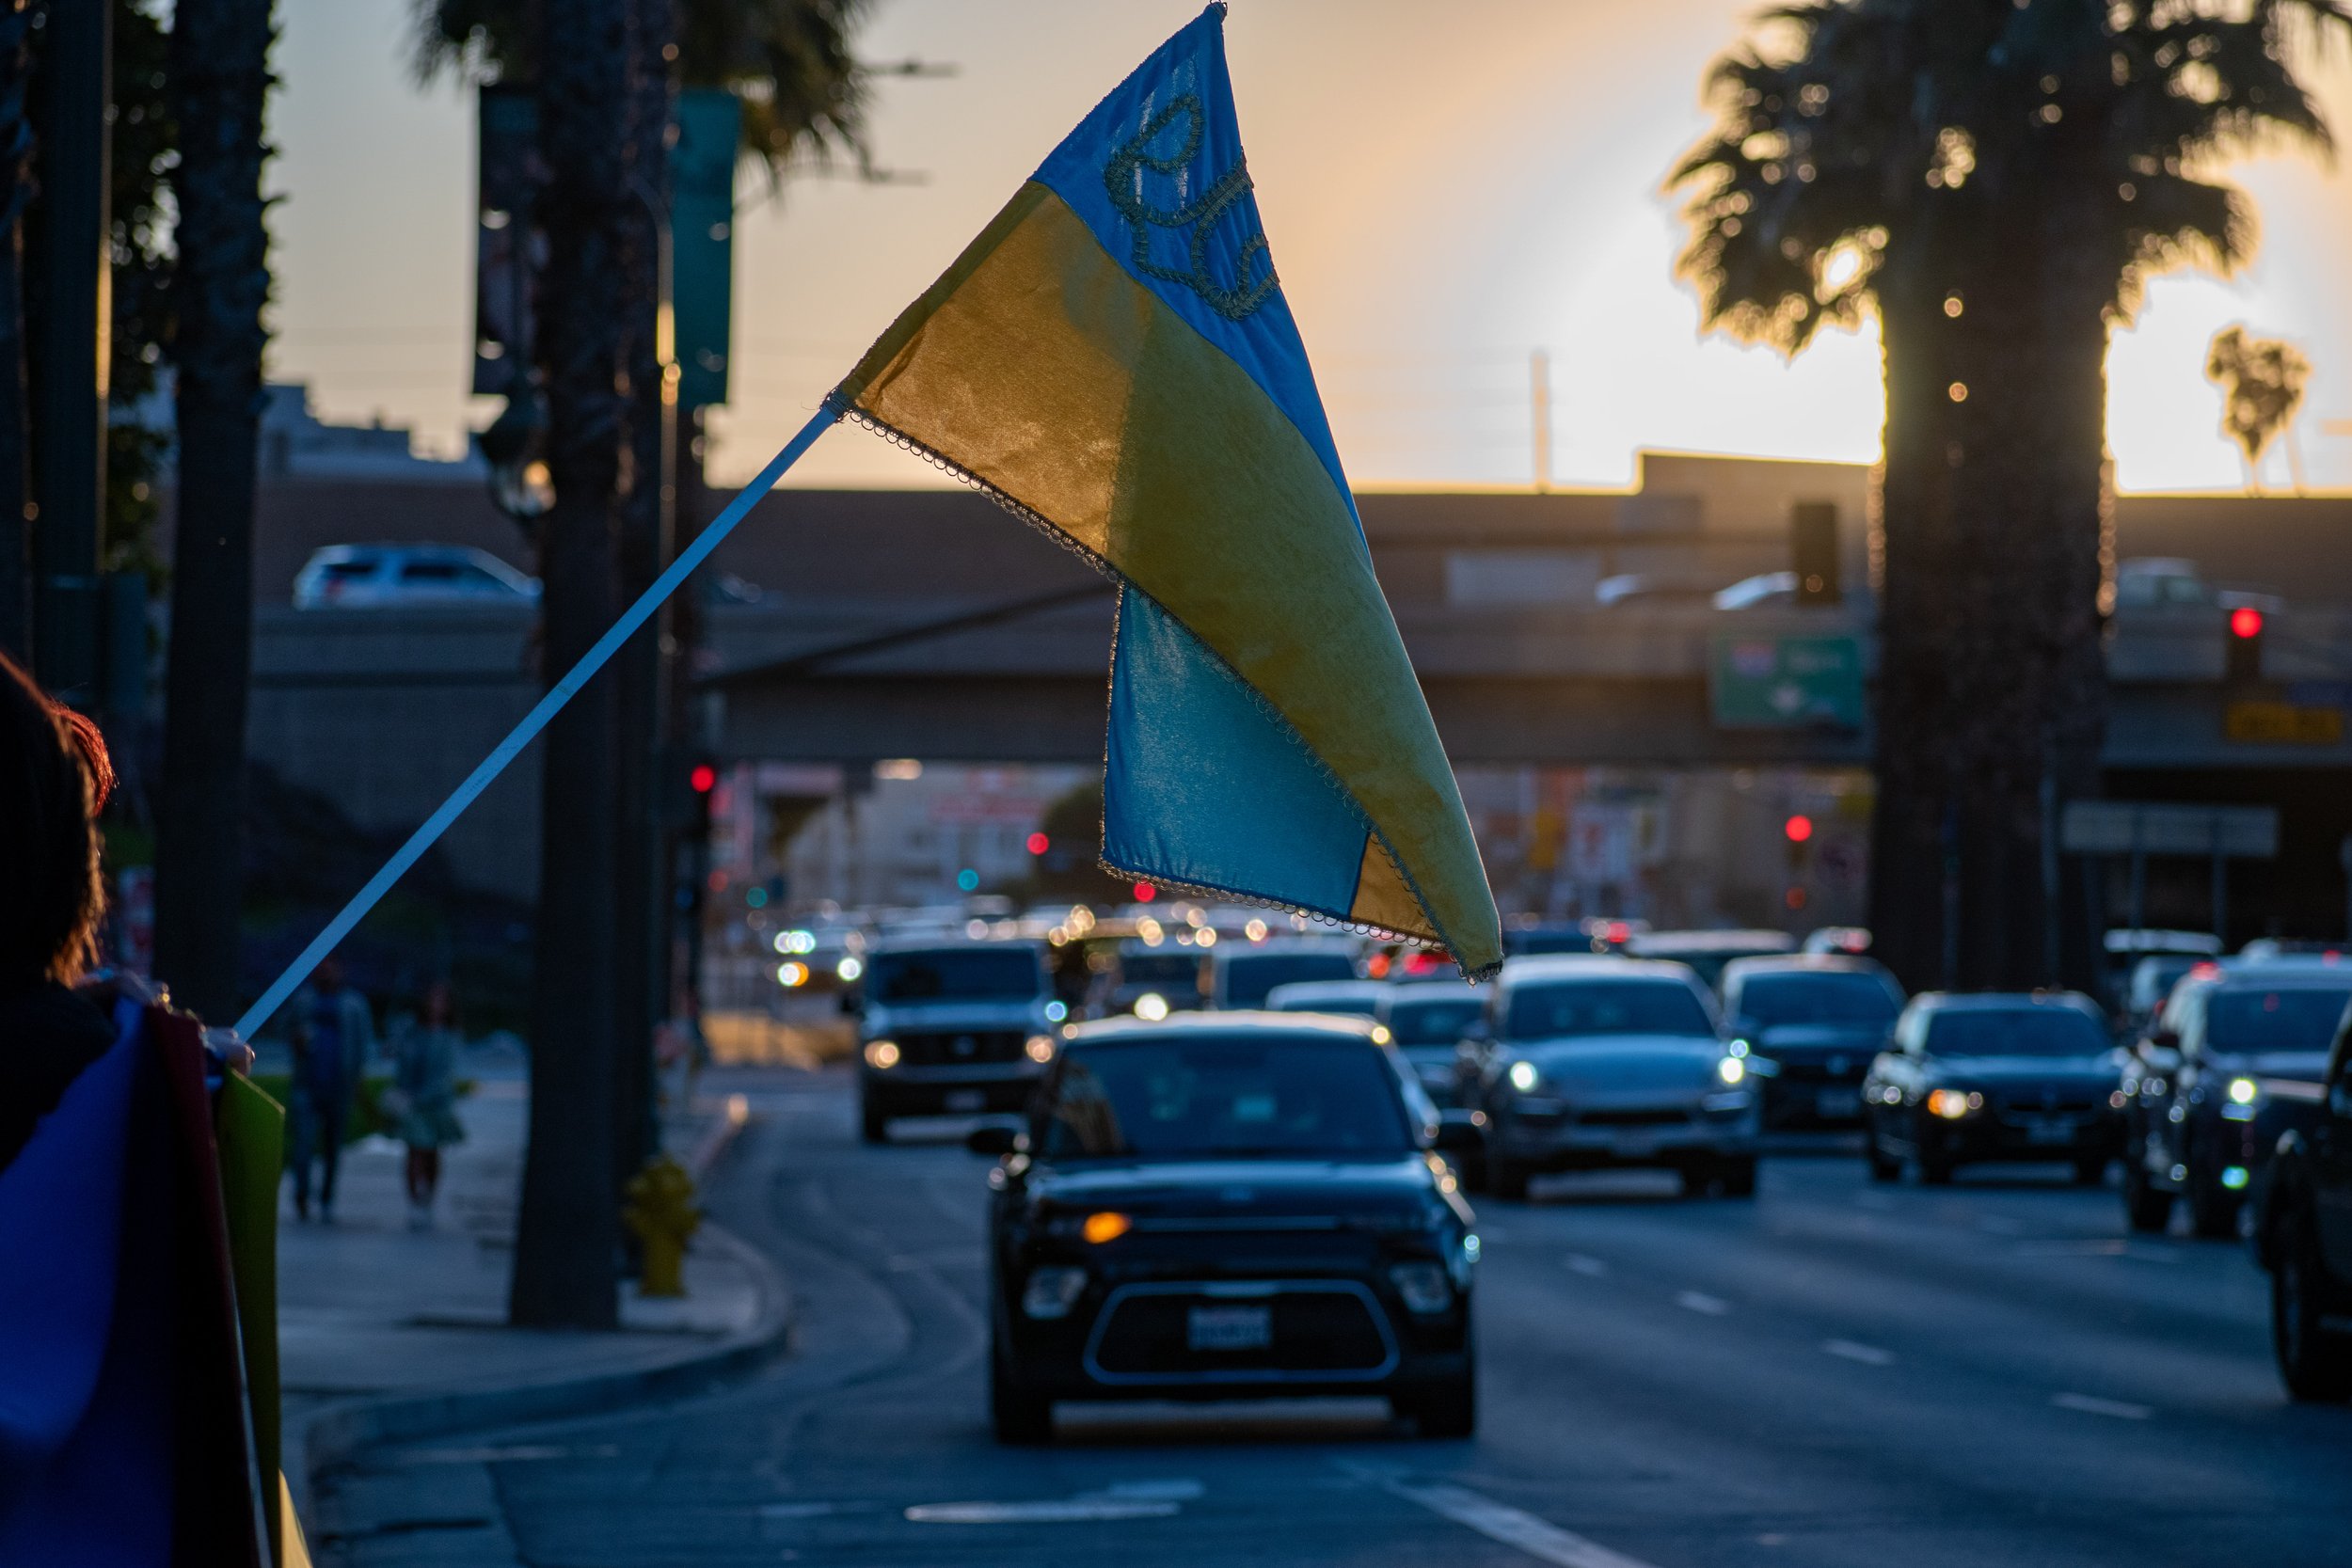  Pro-Ukrainian protestors wave a flag in support at 11111 Santa Monica Blvd in Santa Monica, Calif. on Feb. 26. Even far away from home, Ukrainian support is widespread, both among Ukrainians living abroad and other citizens. (Marc Federici | The Cor